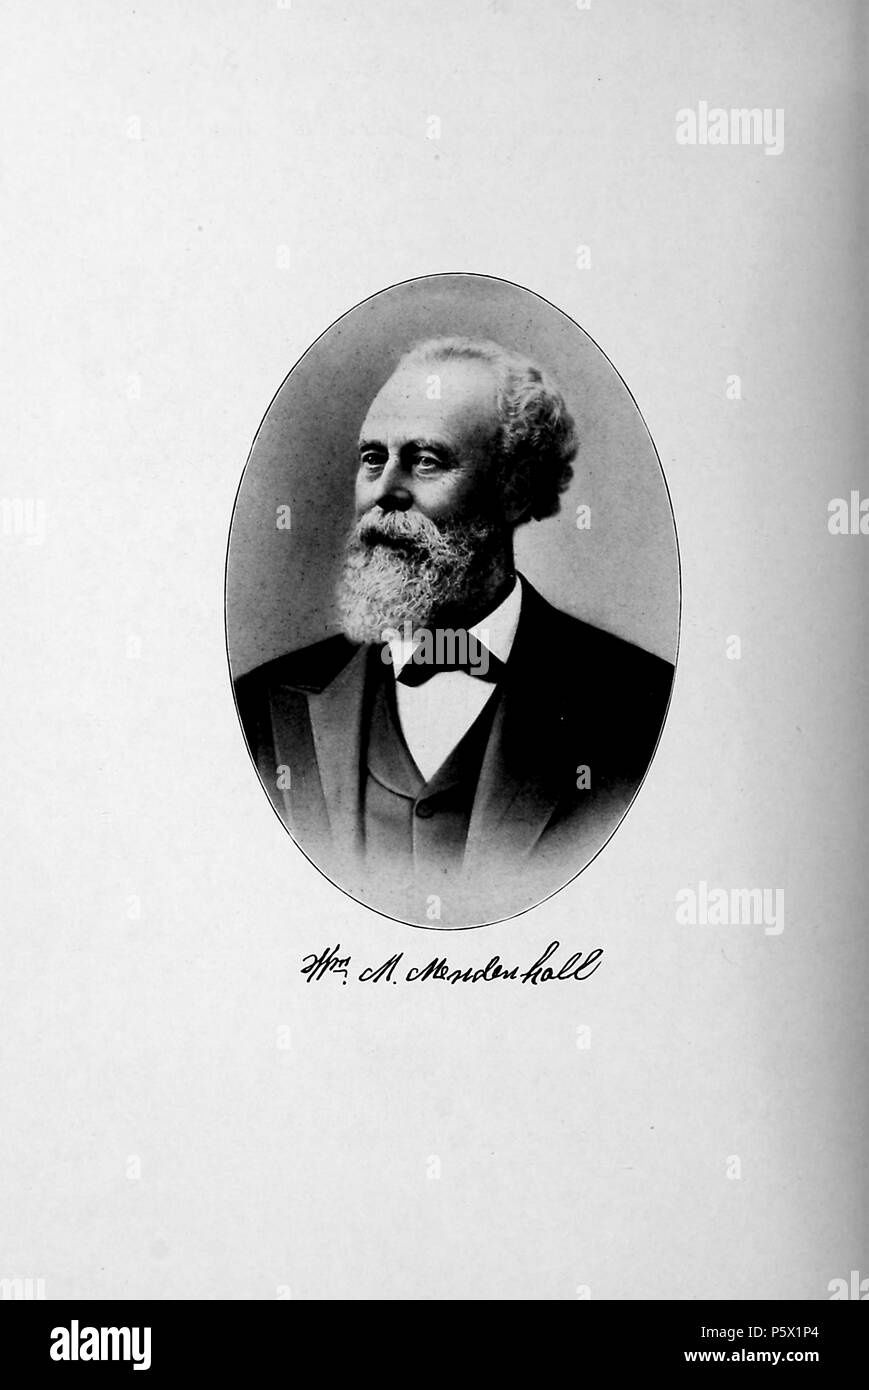 Black and white portrait photograph of prominent California pioneer and founder of Mendenhall Springs health spa, William M Mendenhall, shown from the chest up, looking off camera, with a bushy white beard, an animated expression on his face, and wearing a dark suit and tie, from the volume 'History of the State of California and Biographical Record of Oakland and Environs, ' authored by JM (James Miller) Guinn, and published in Los Angeles by the Historic Record Co, 1907. Courtesy Internet Archive. () Stock Photo